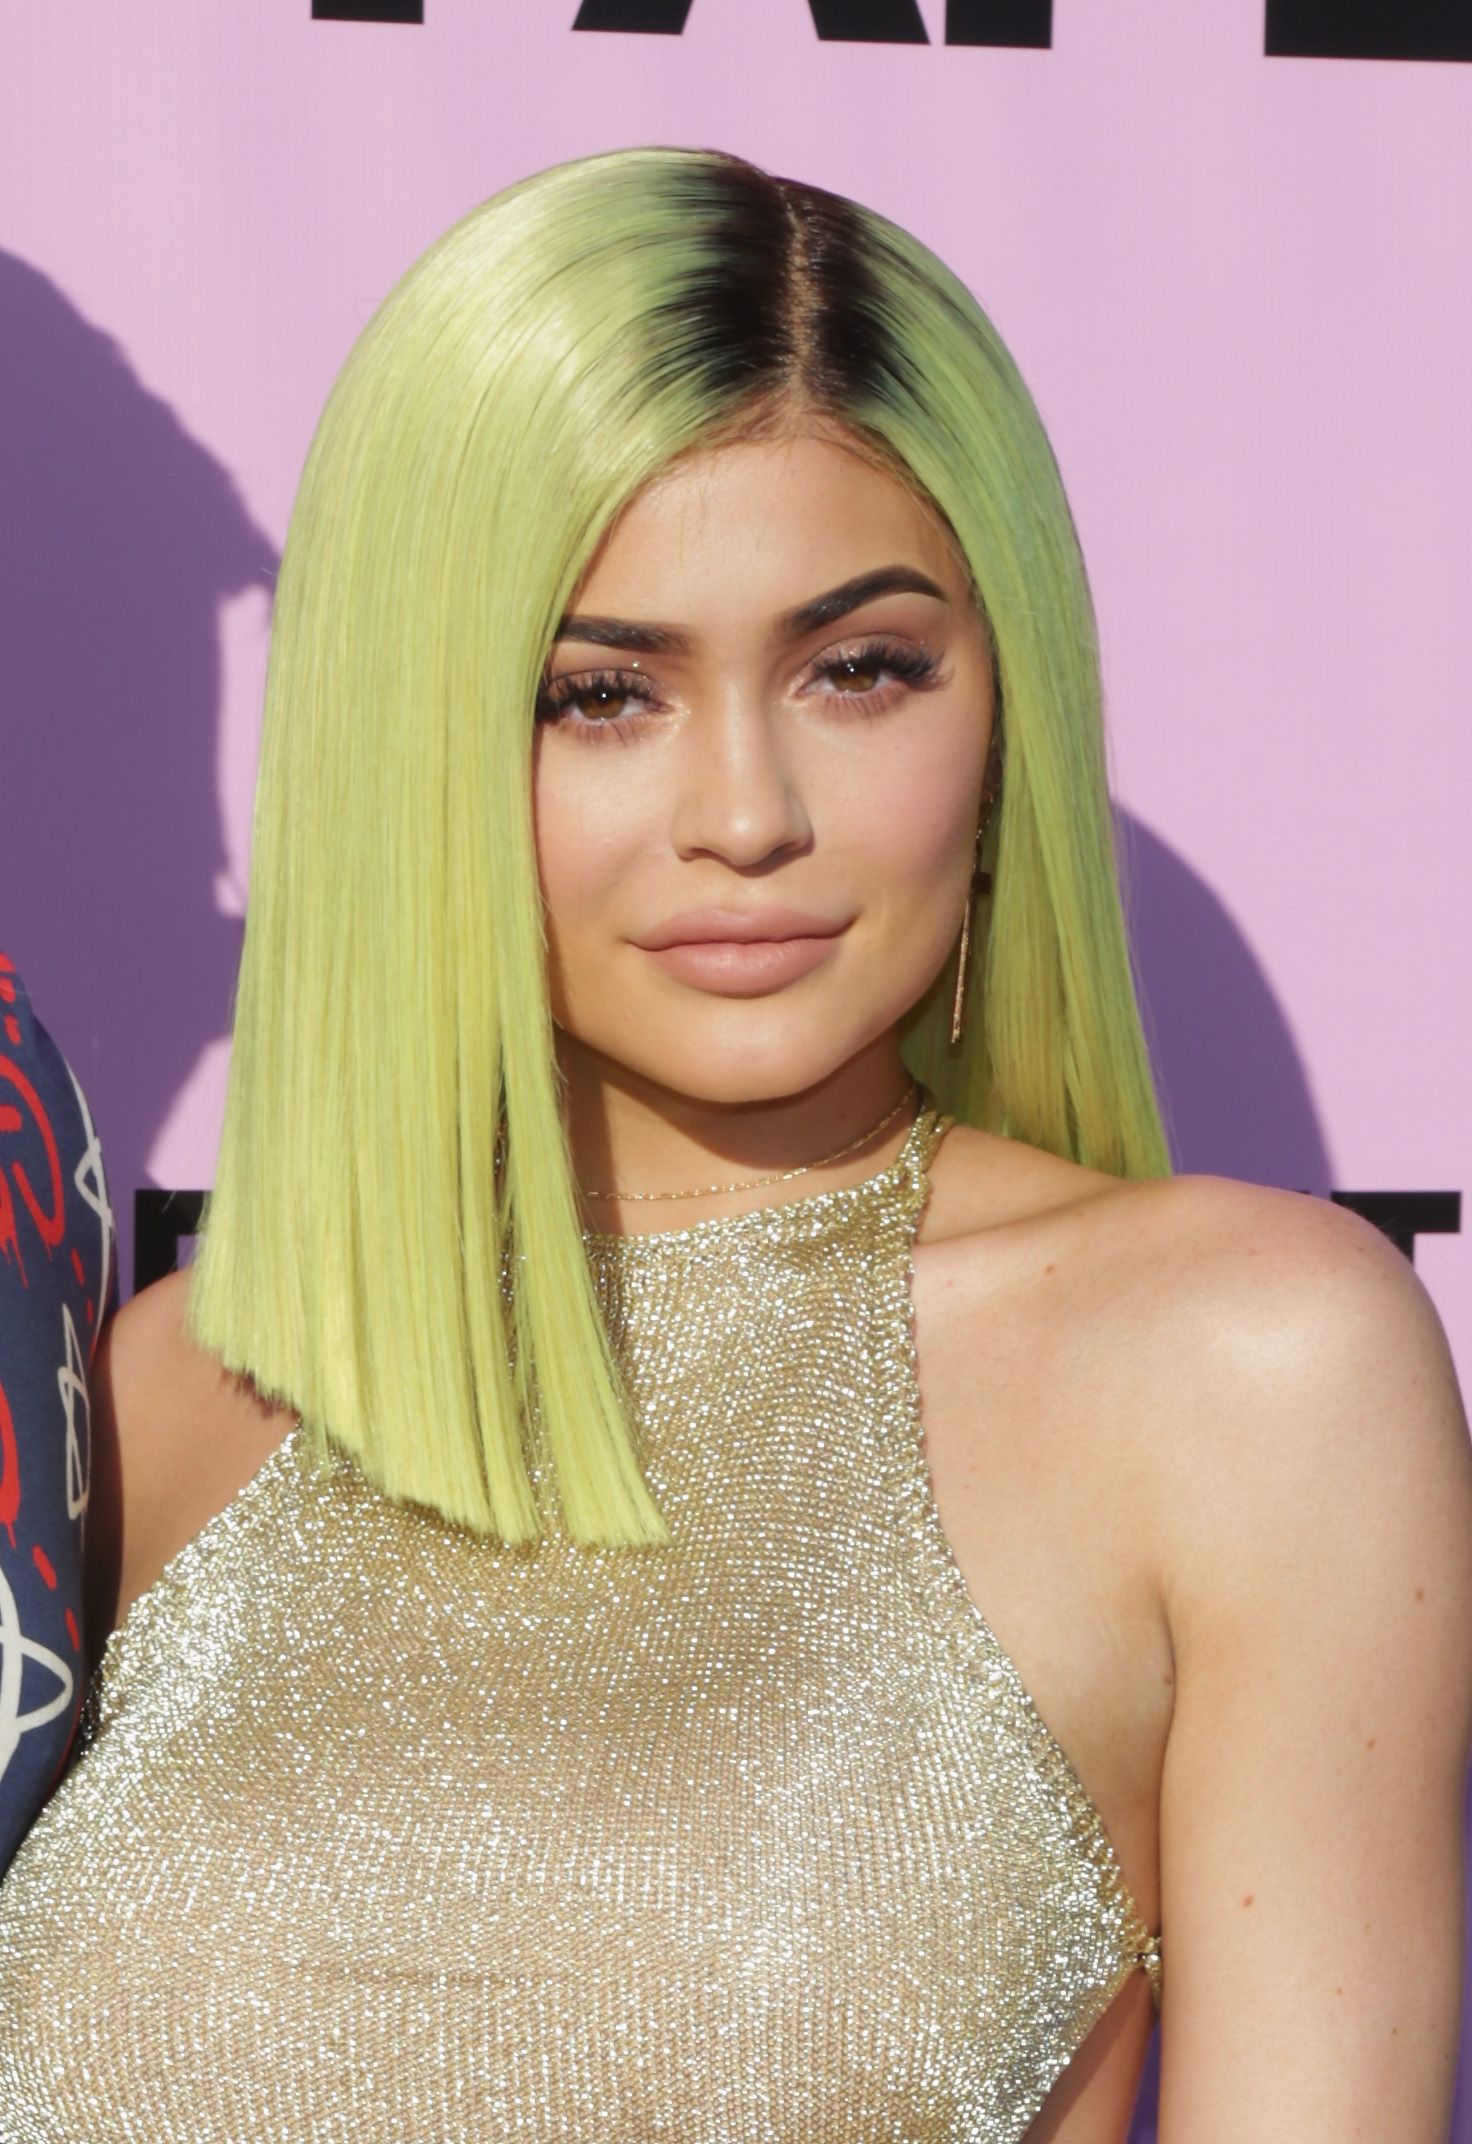 Kylie Jenner Gets Kris Jenner-Inspired Short Pixie Haircut | The Daily Dish